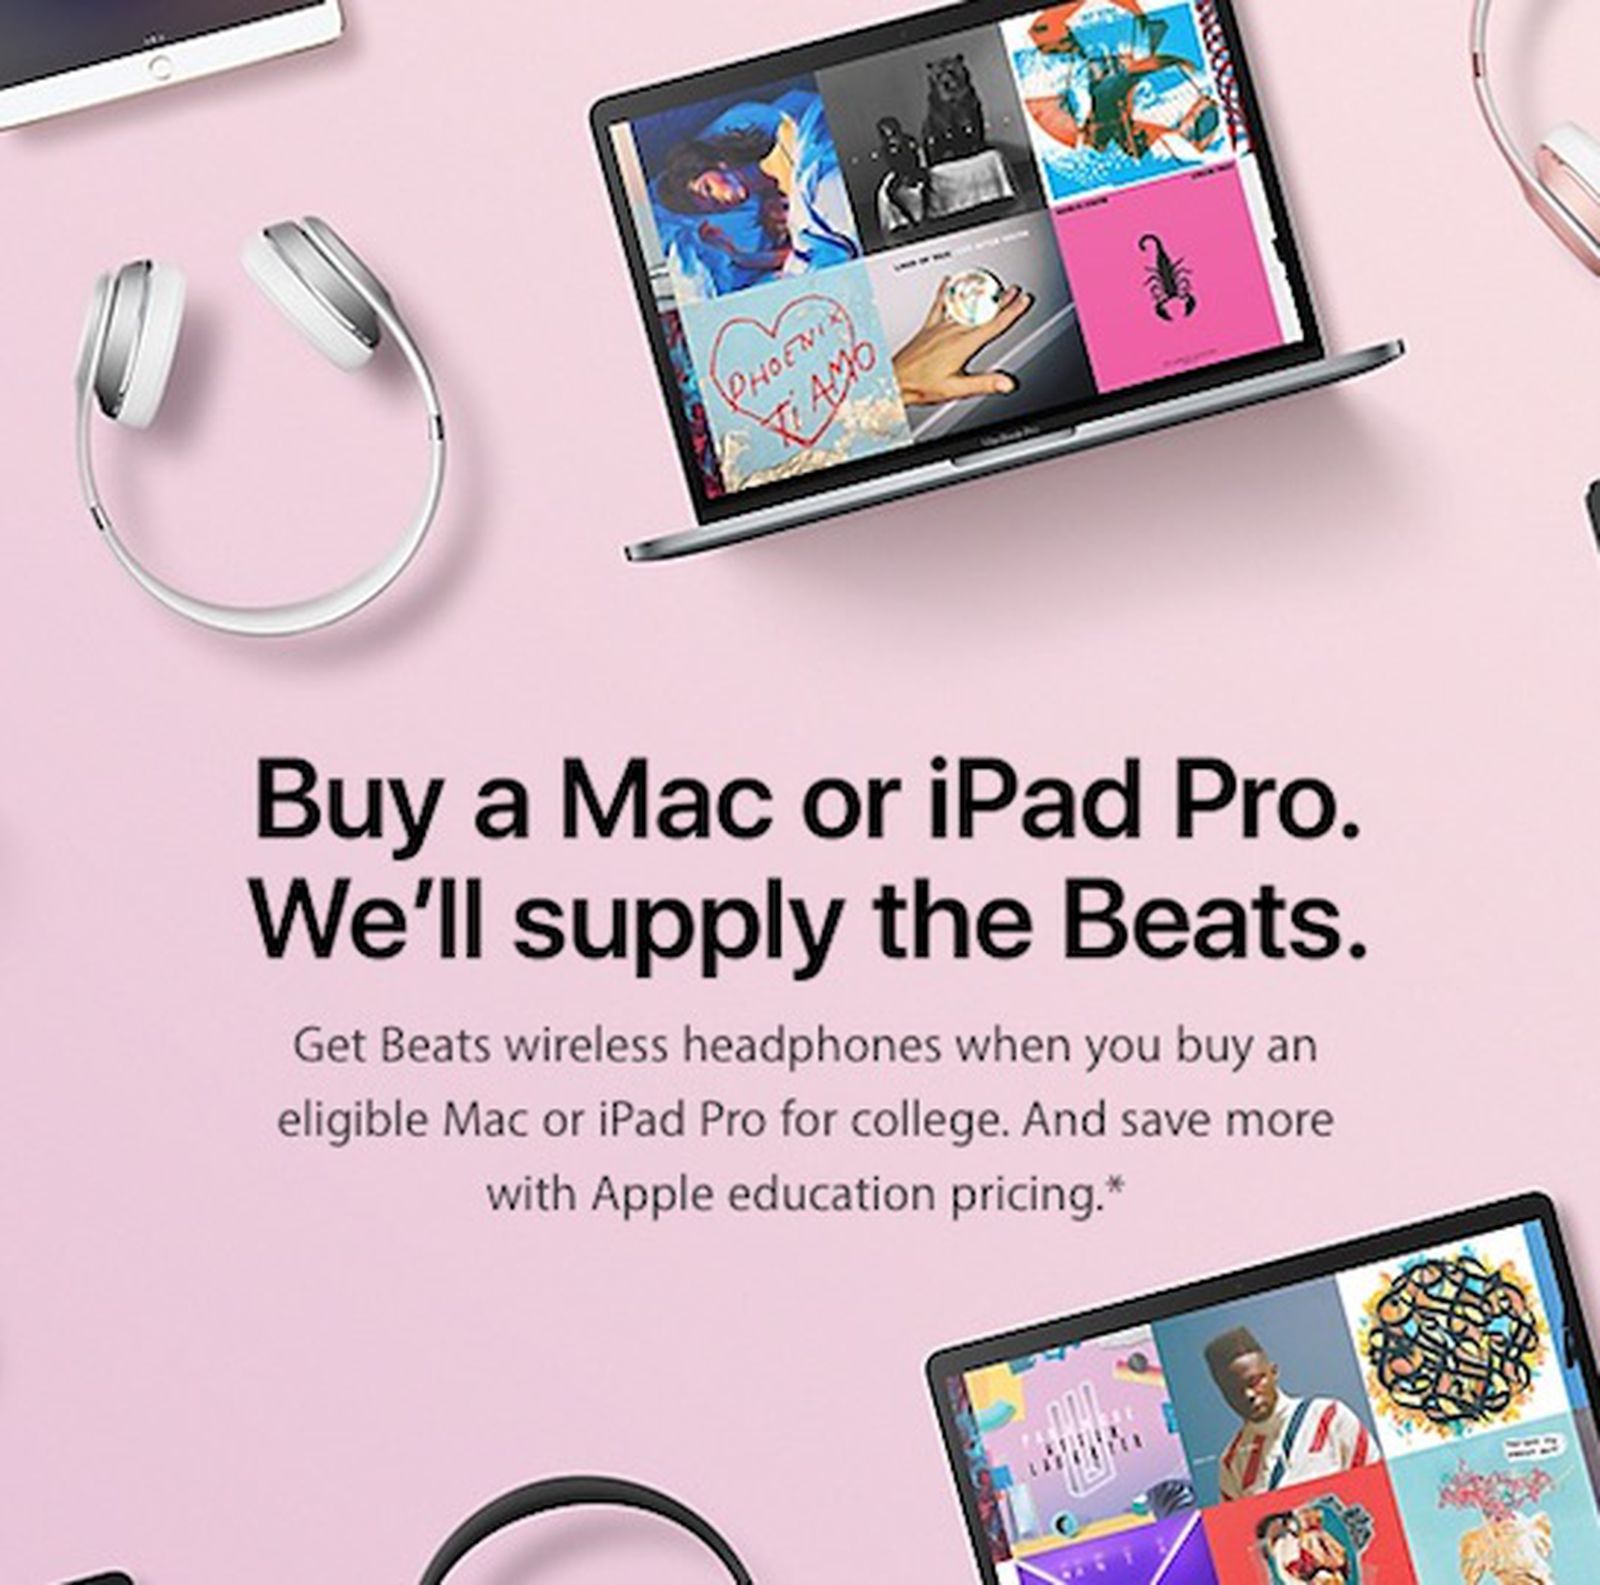 Apple's Back to School promotion slated to start Friday - 9to5Mac